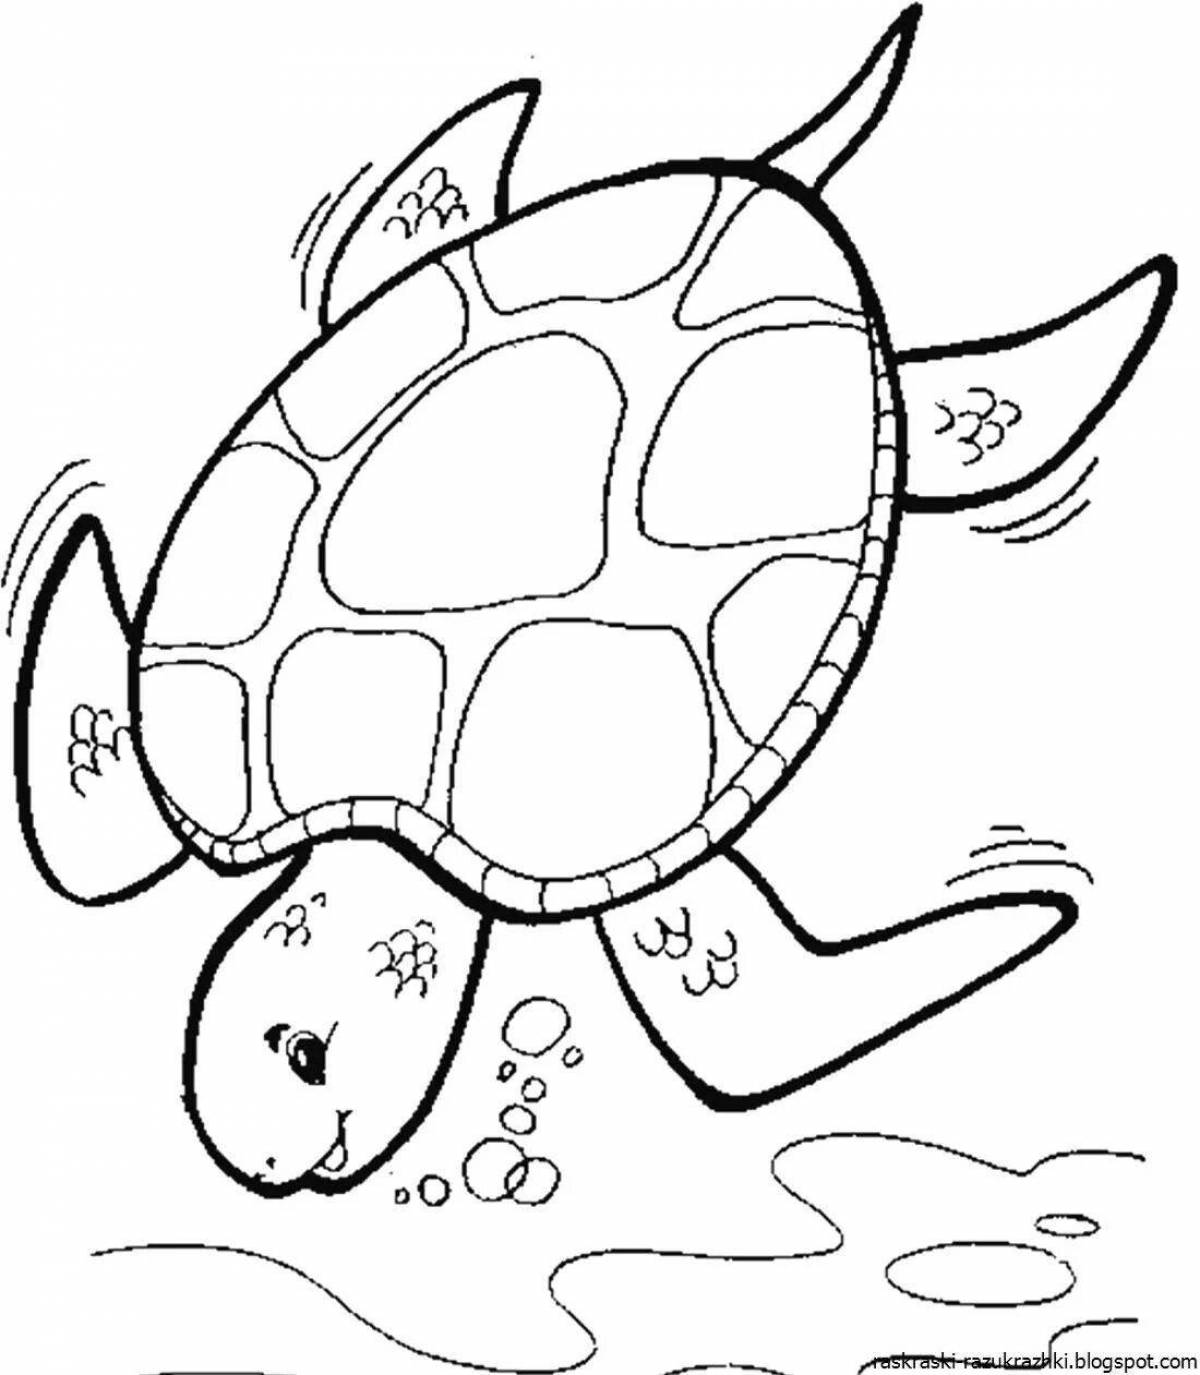 Cute sea turtle coloring book for kids